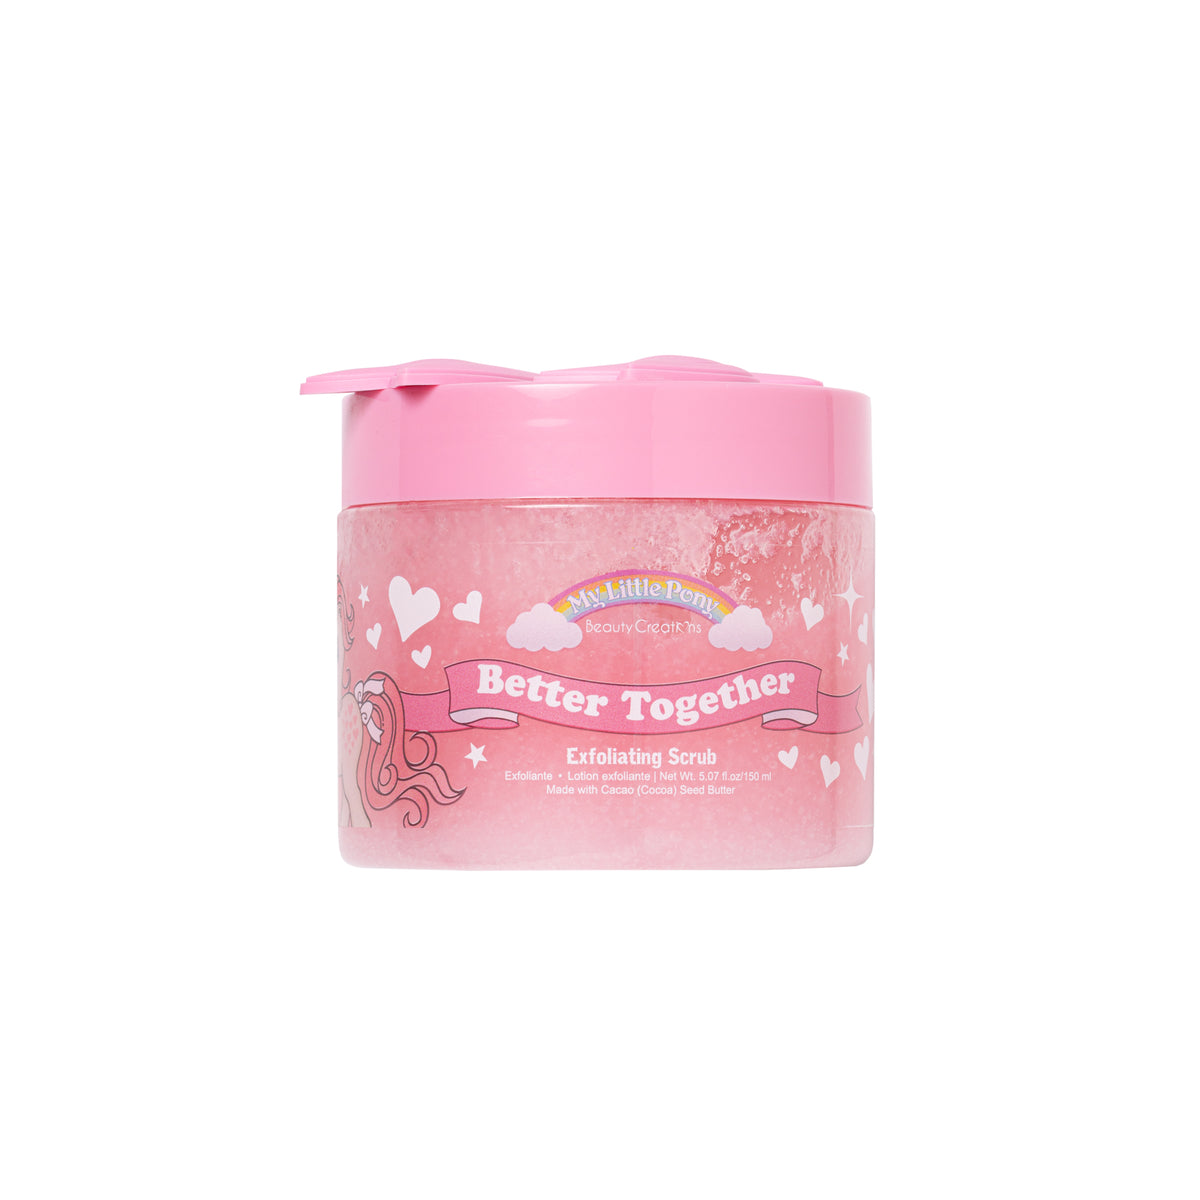 "BETTER  TOGETHER" FLORAL BODY SCRUB MY LITTLE PONY - BEAUTY CREATIONS